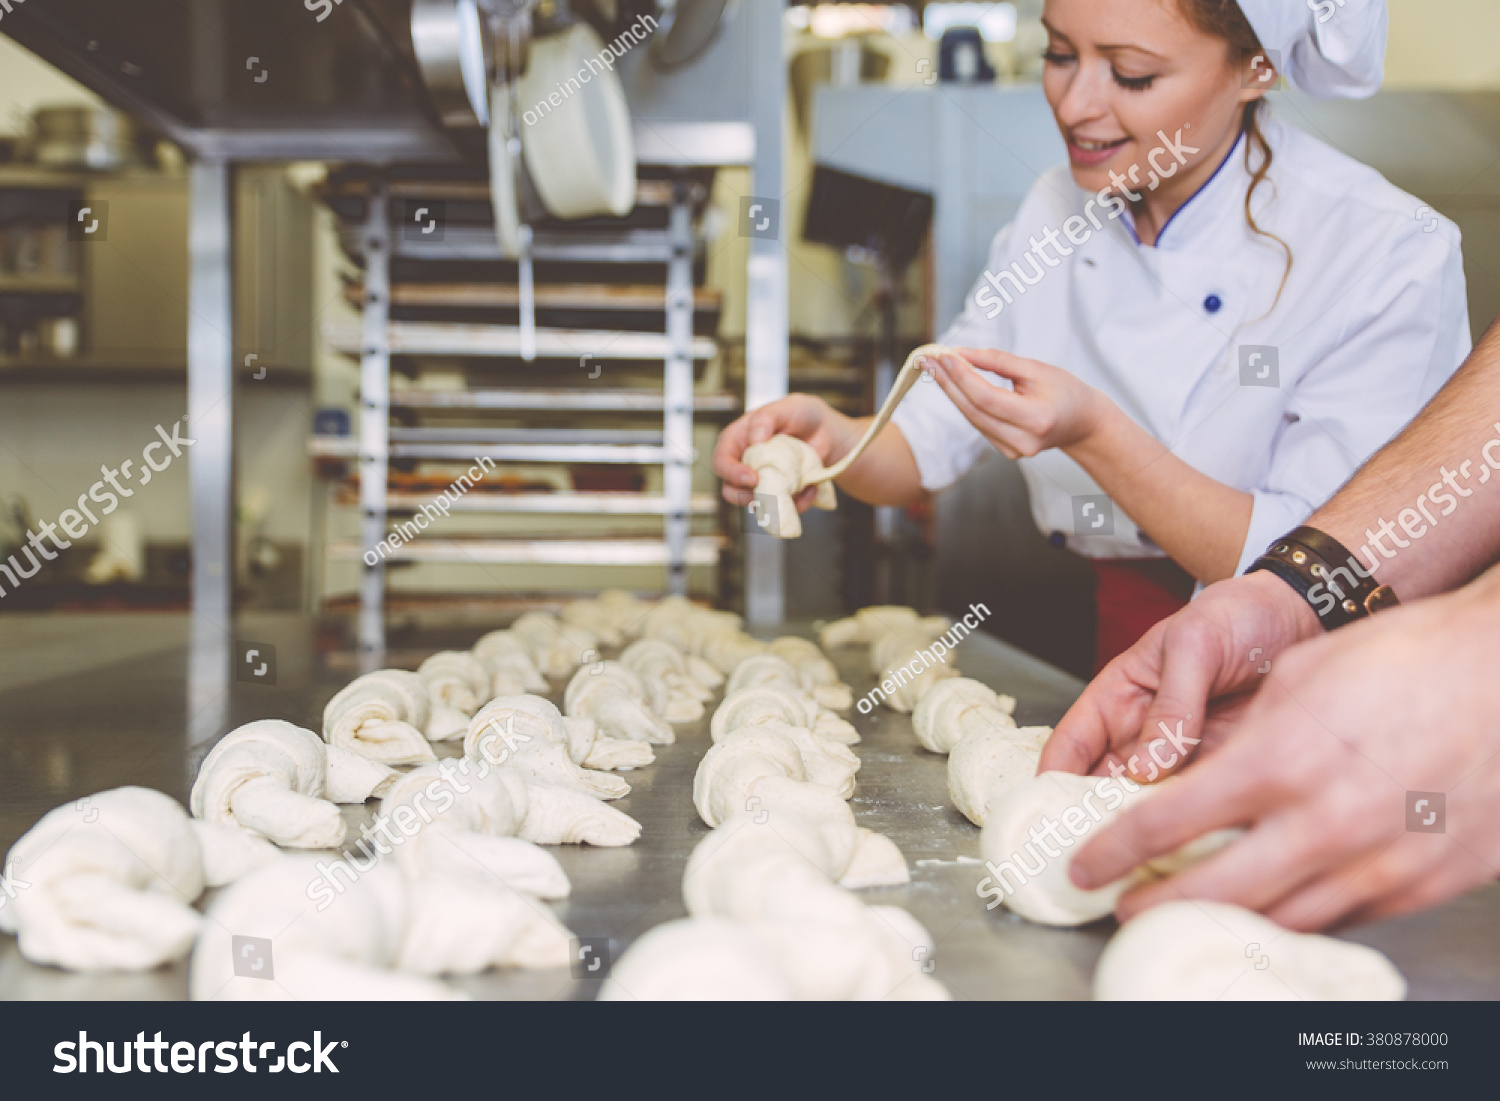 Chef preparing sweet croissant in the pastry shop laboratory. Industrial concept about food. Focus on the sweets #380878000